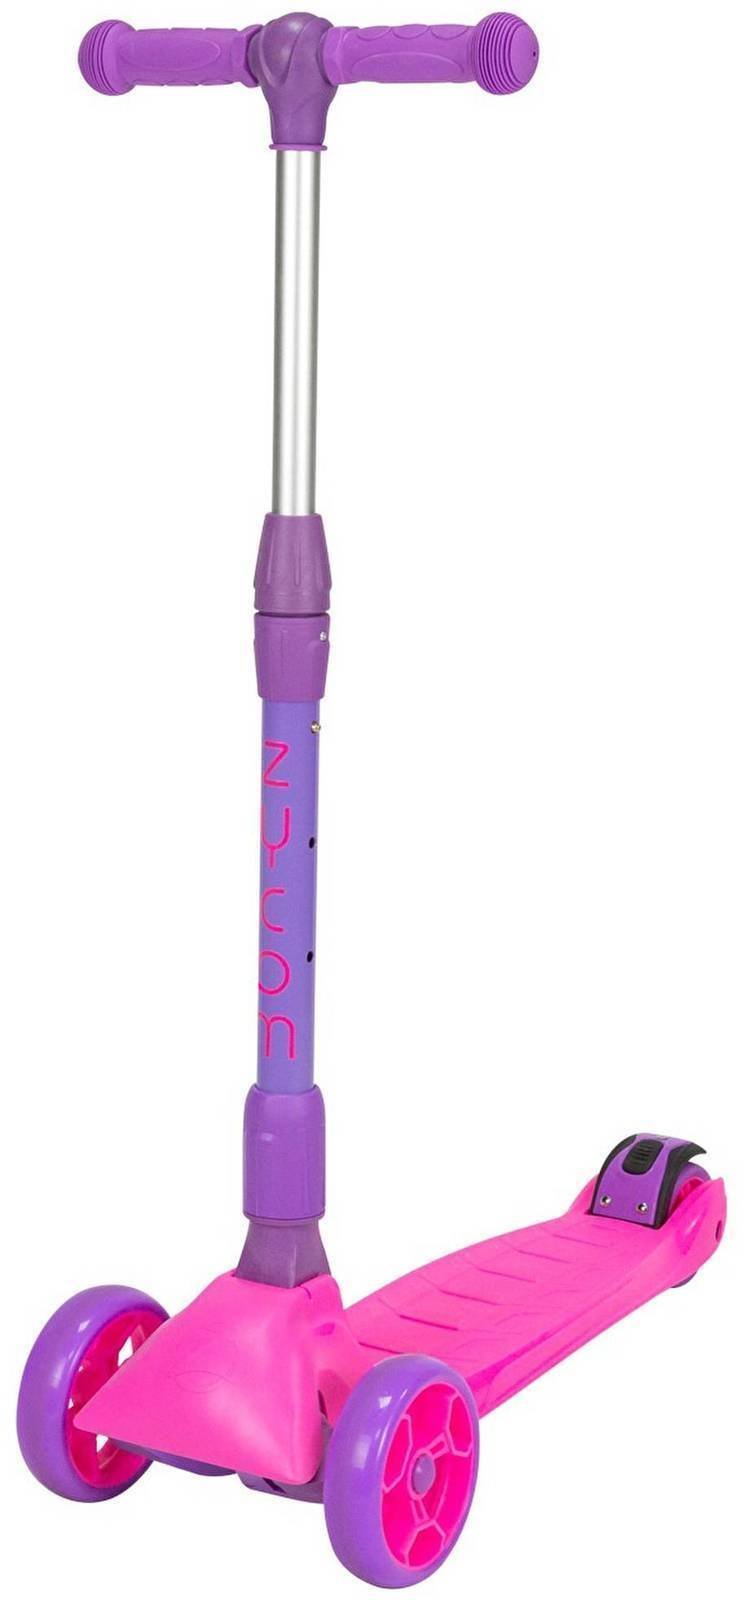 Scooter per bambini / Triciclo Zycom Scooter Zinger Pink/Purple Scooter per bambini / Triciclo